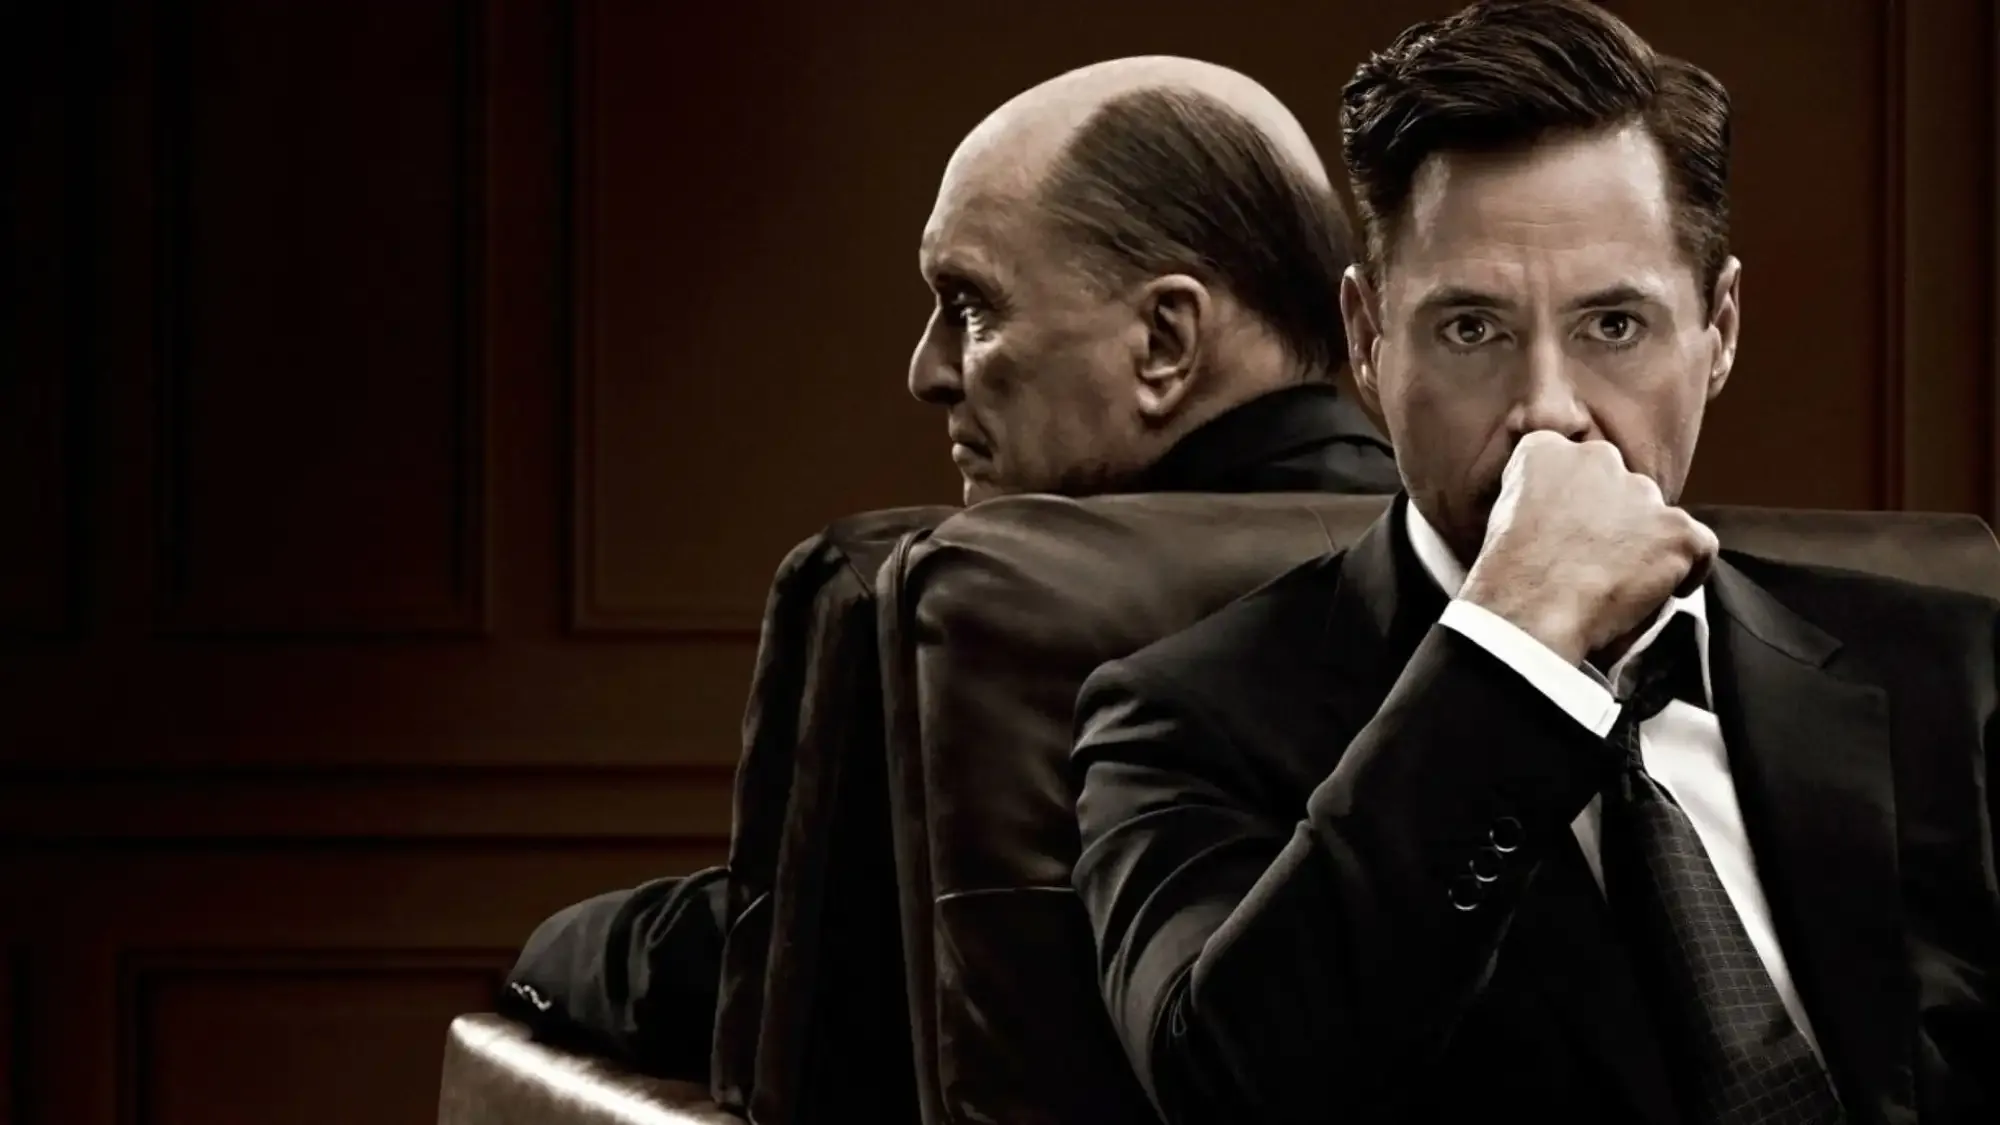 The Judge movie review